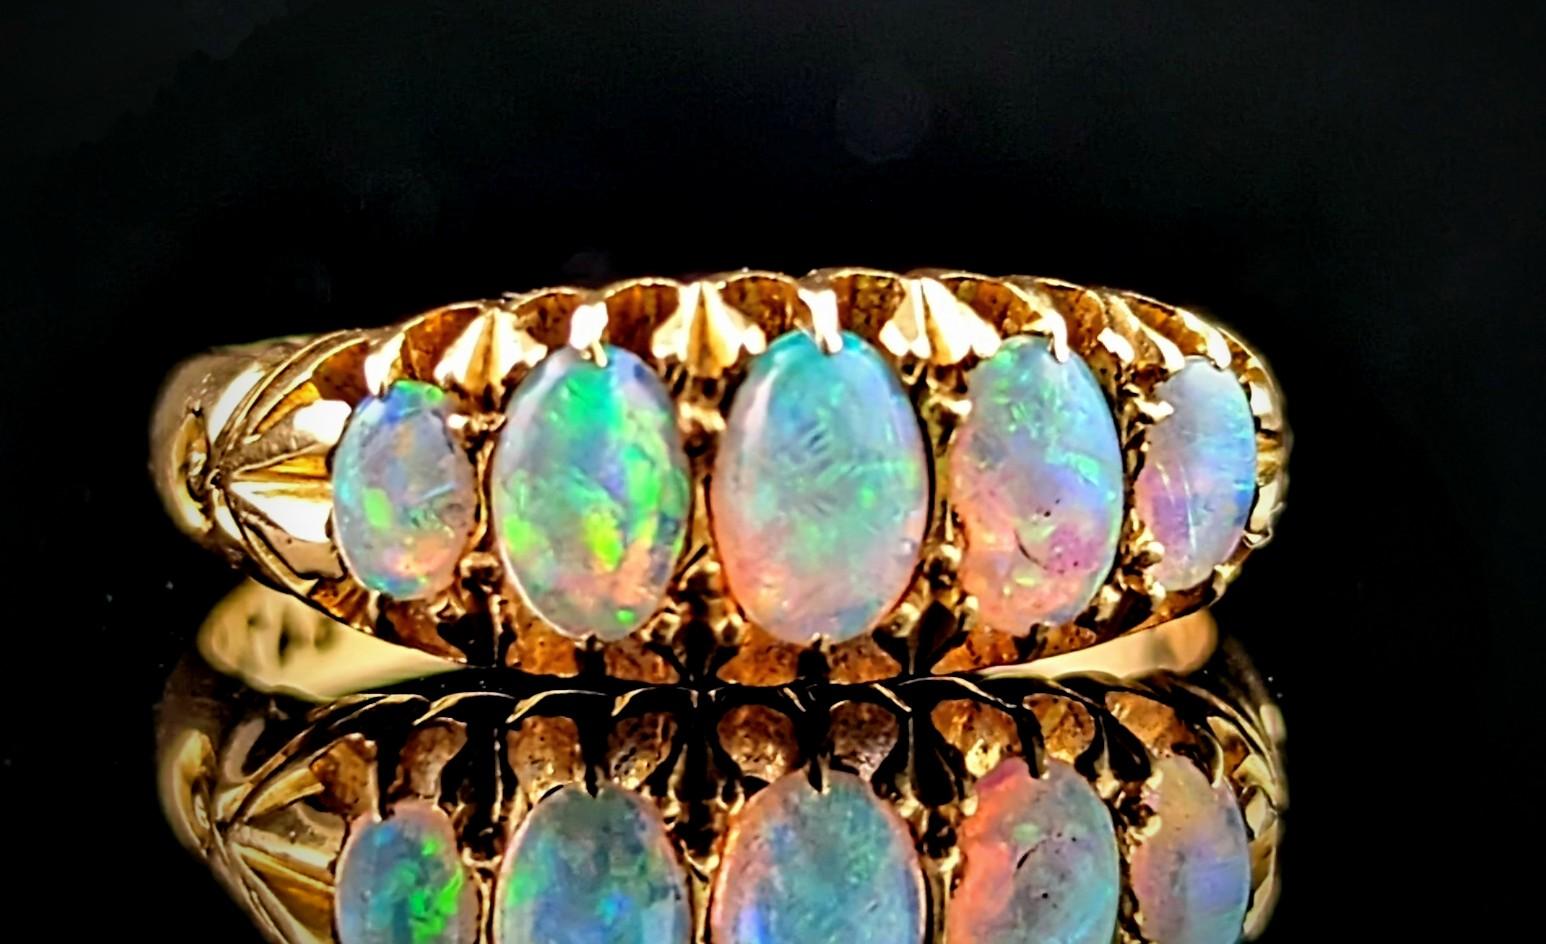 You can't help but be enchanted by this gorgeous antique, early 20th century opal ring.

A rich 18ct yellow gold band with a boat head style setting and decorative carved shoulders.

The face is set with five beautiful opal cabochons, the largest to